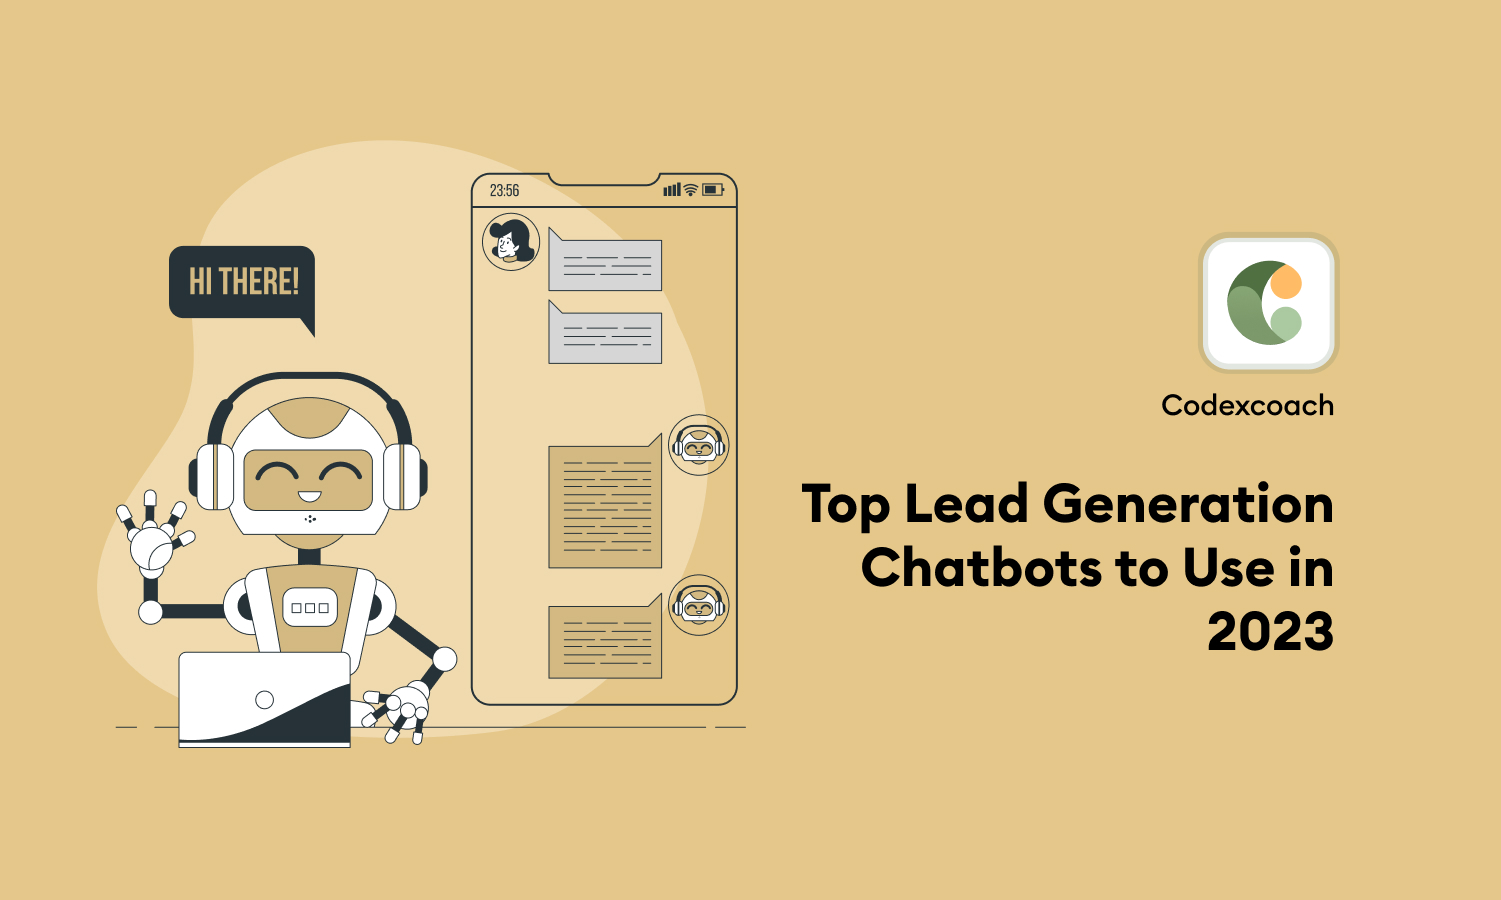 Top Lead Generation Chatbots to Use in 2023